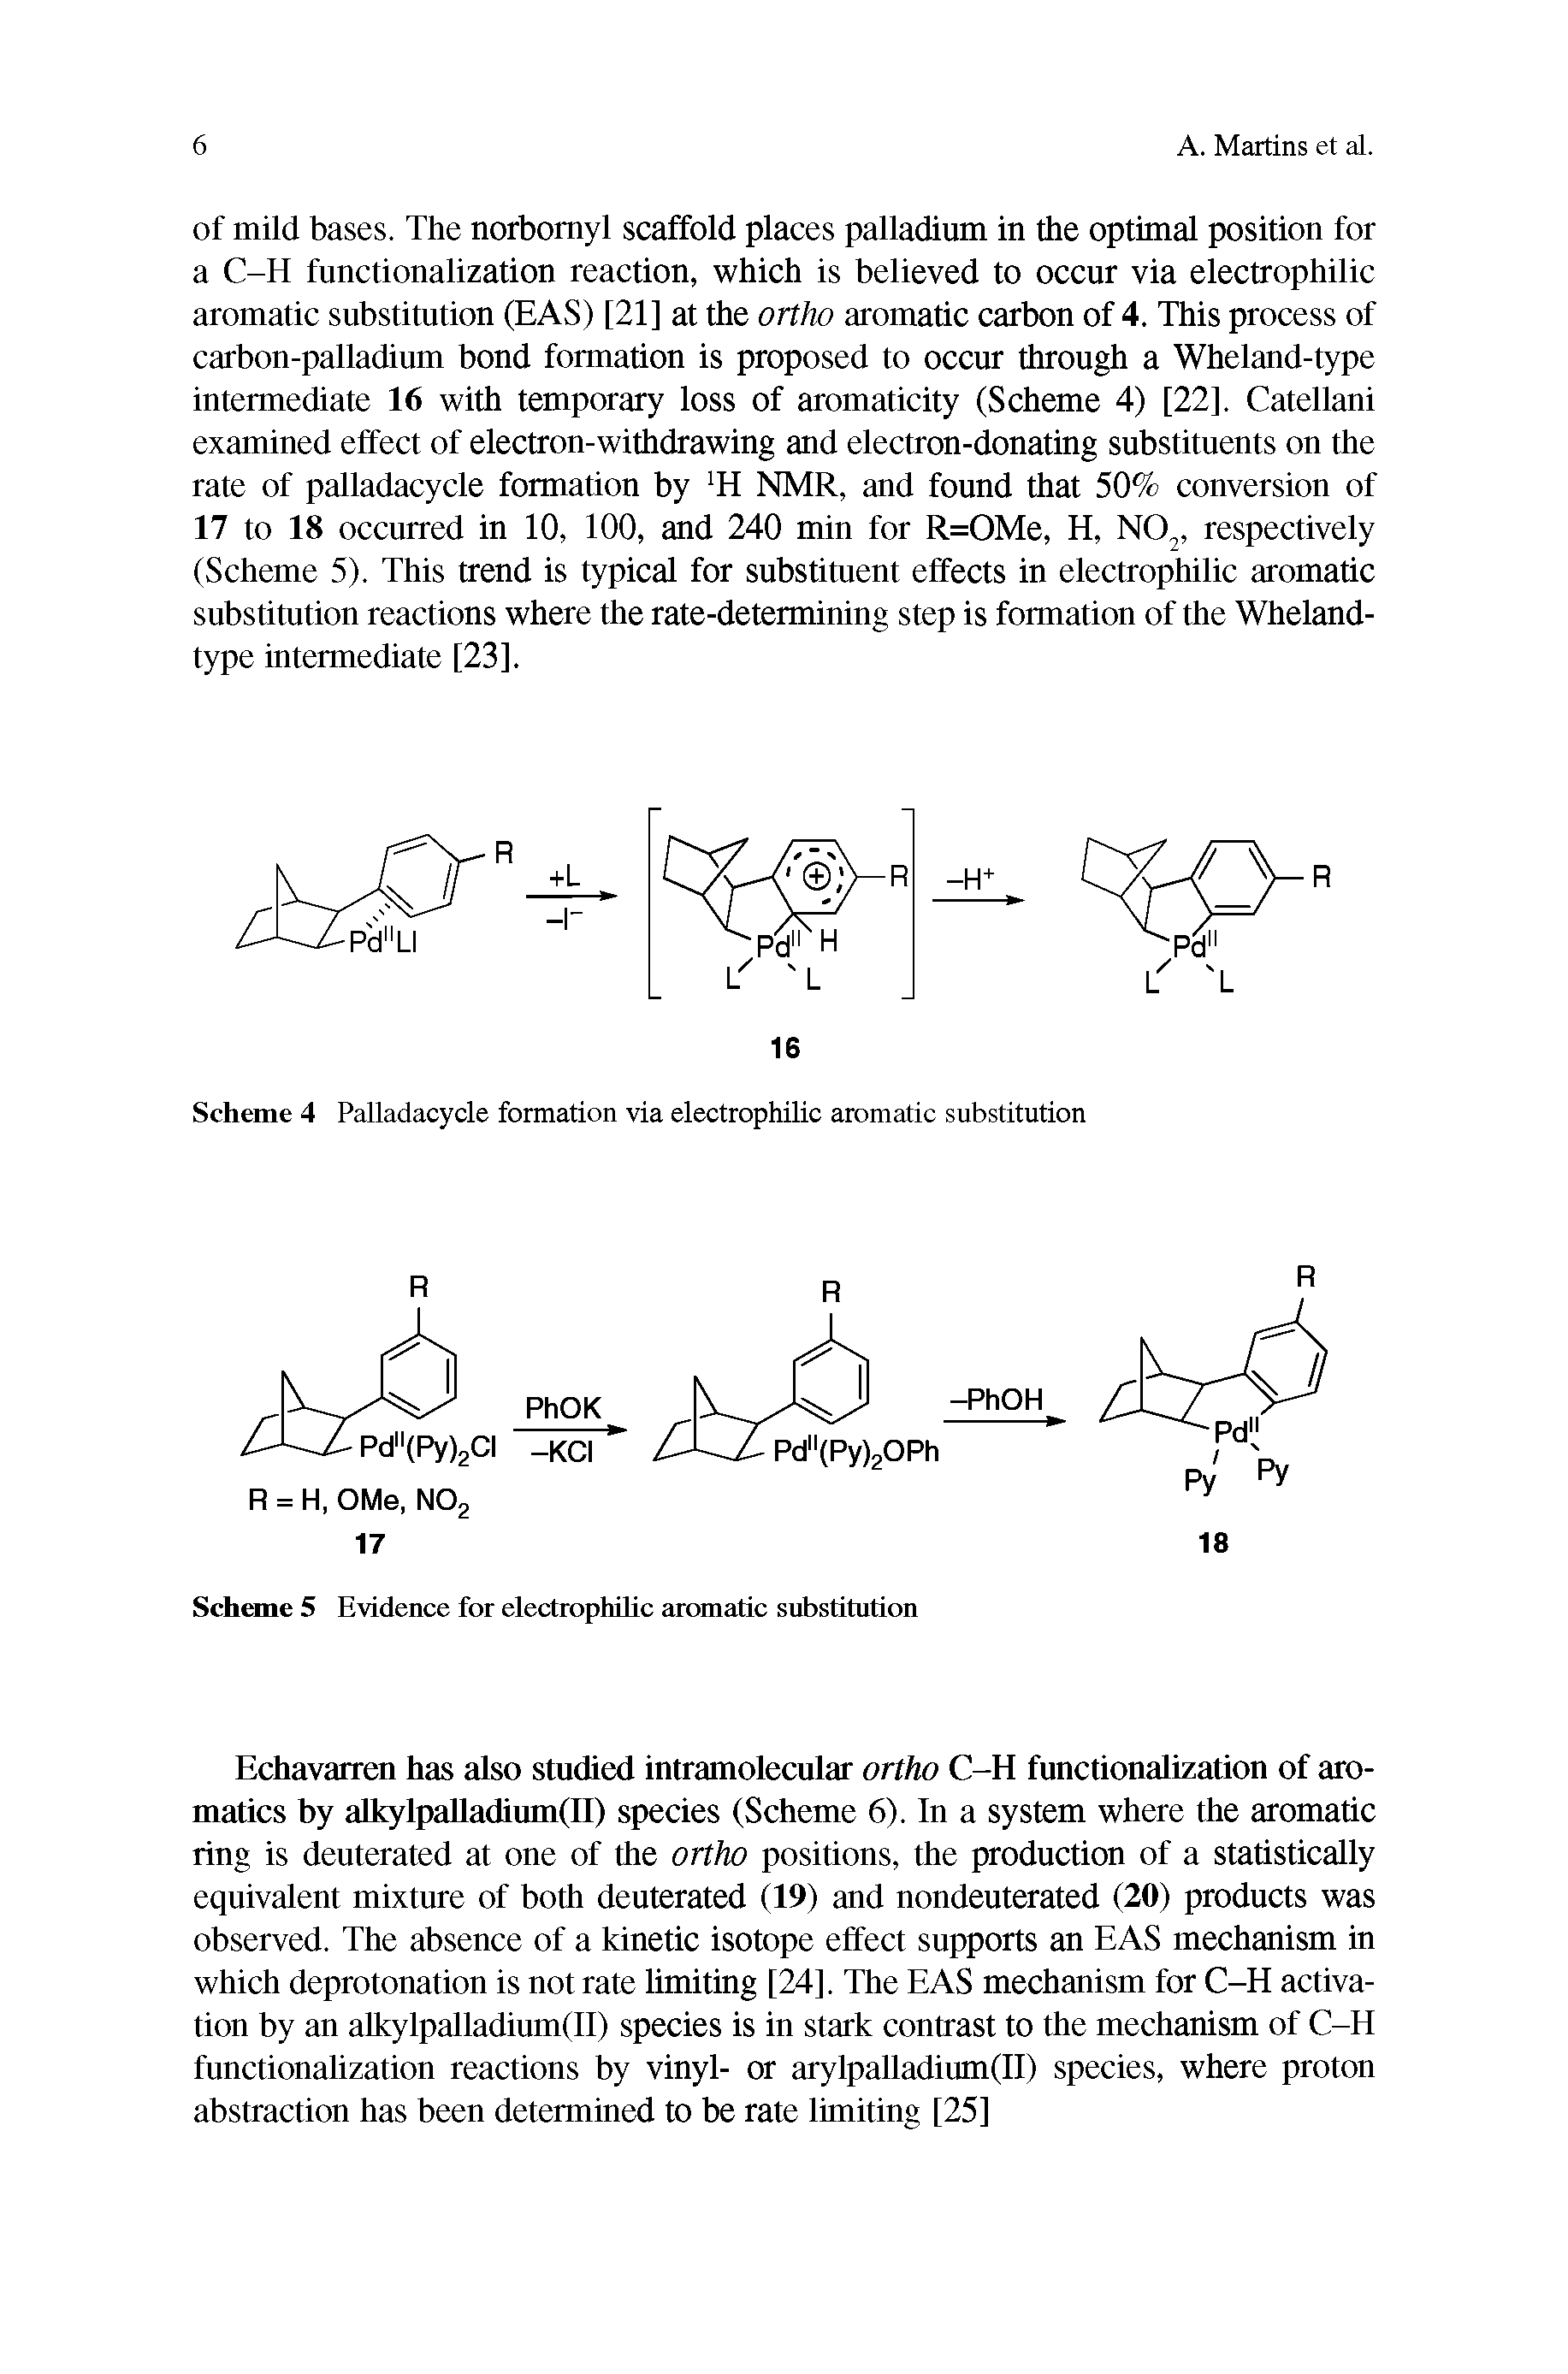 Scheme 4 Palladacycle formation via electrophilic aromatic substitution...